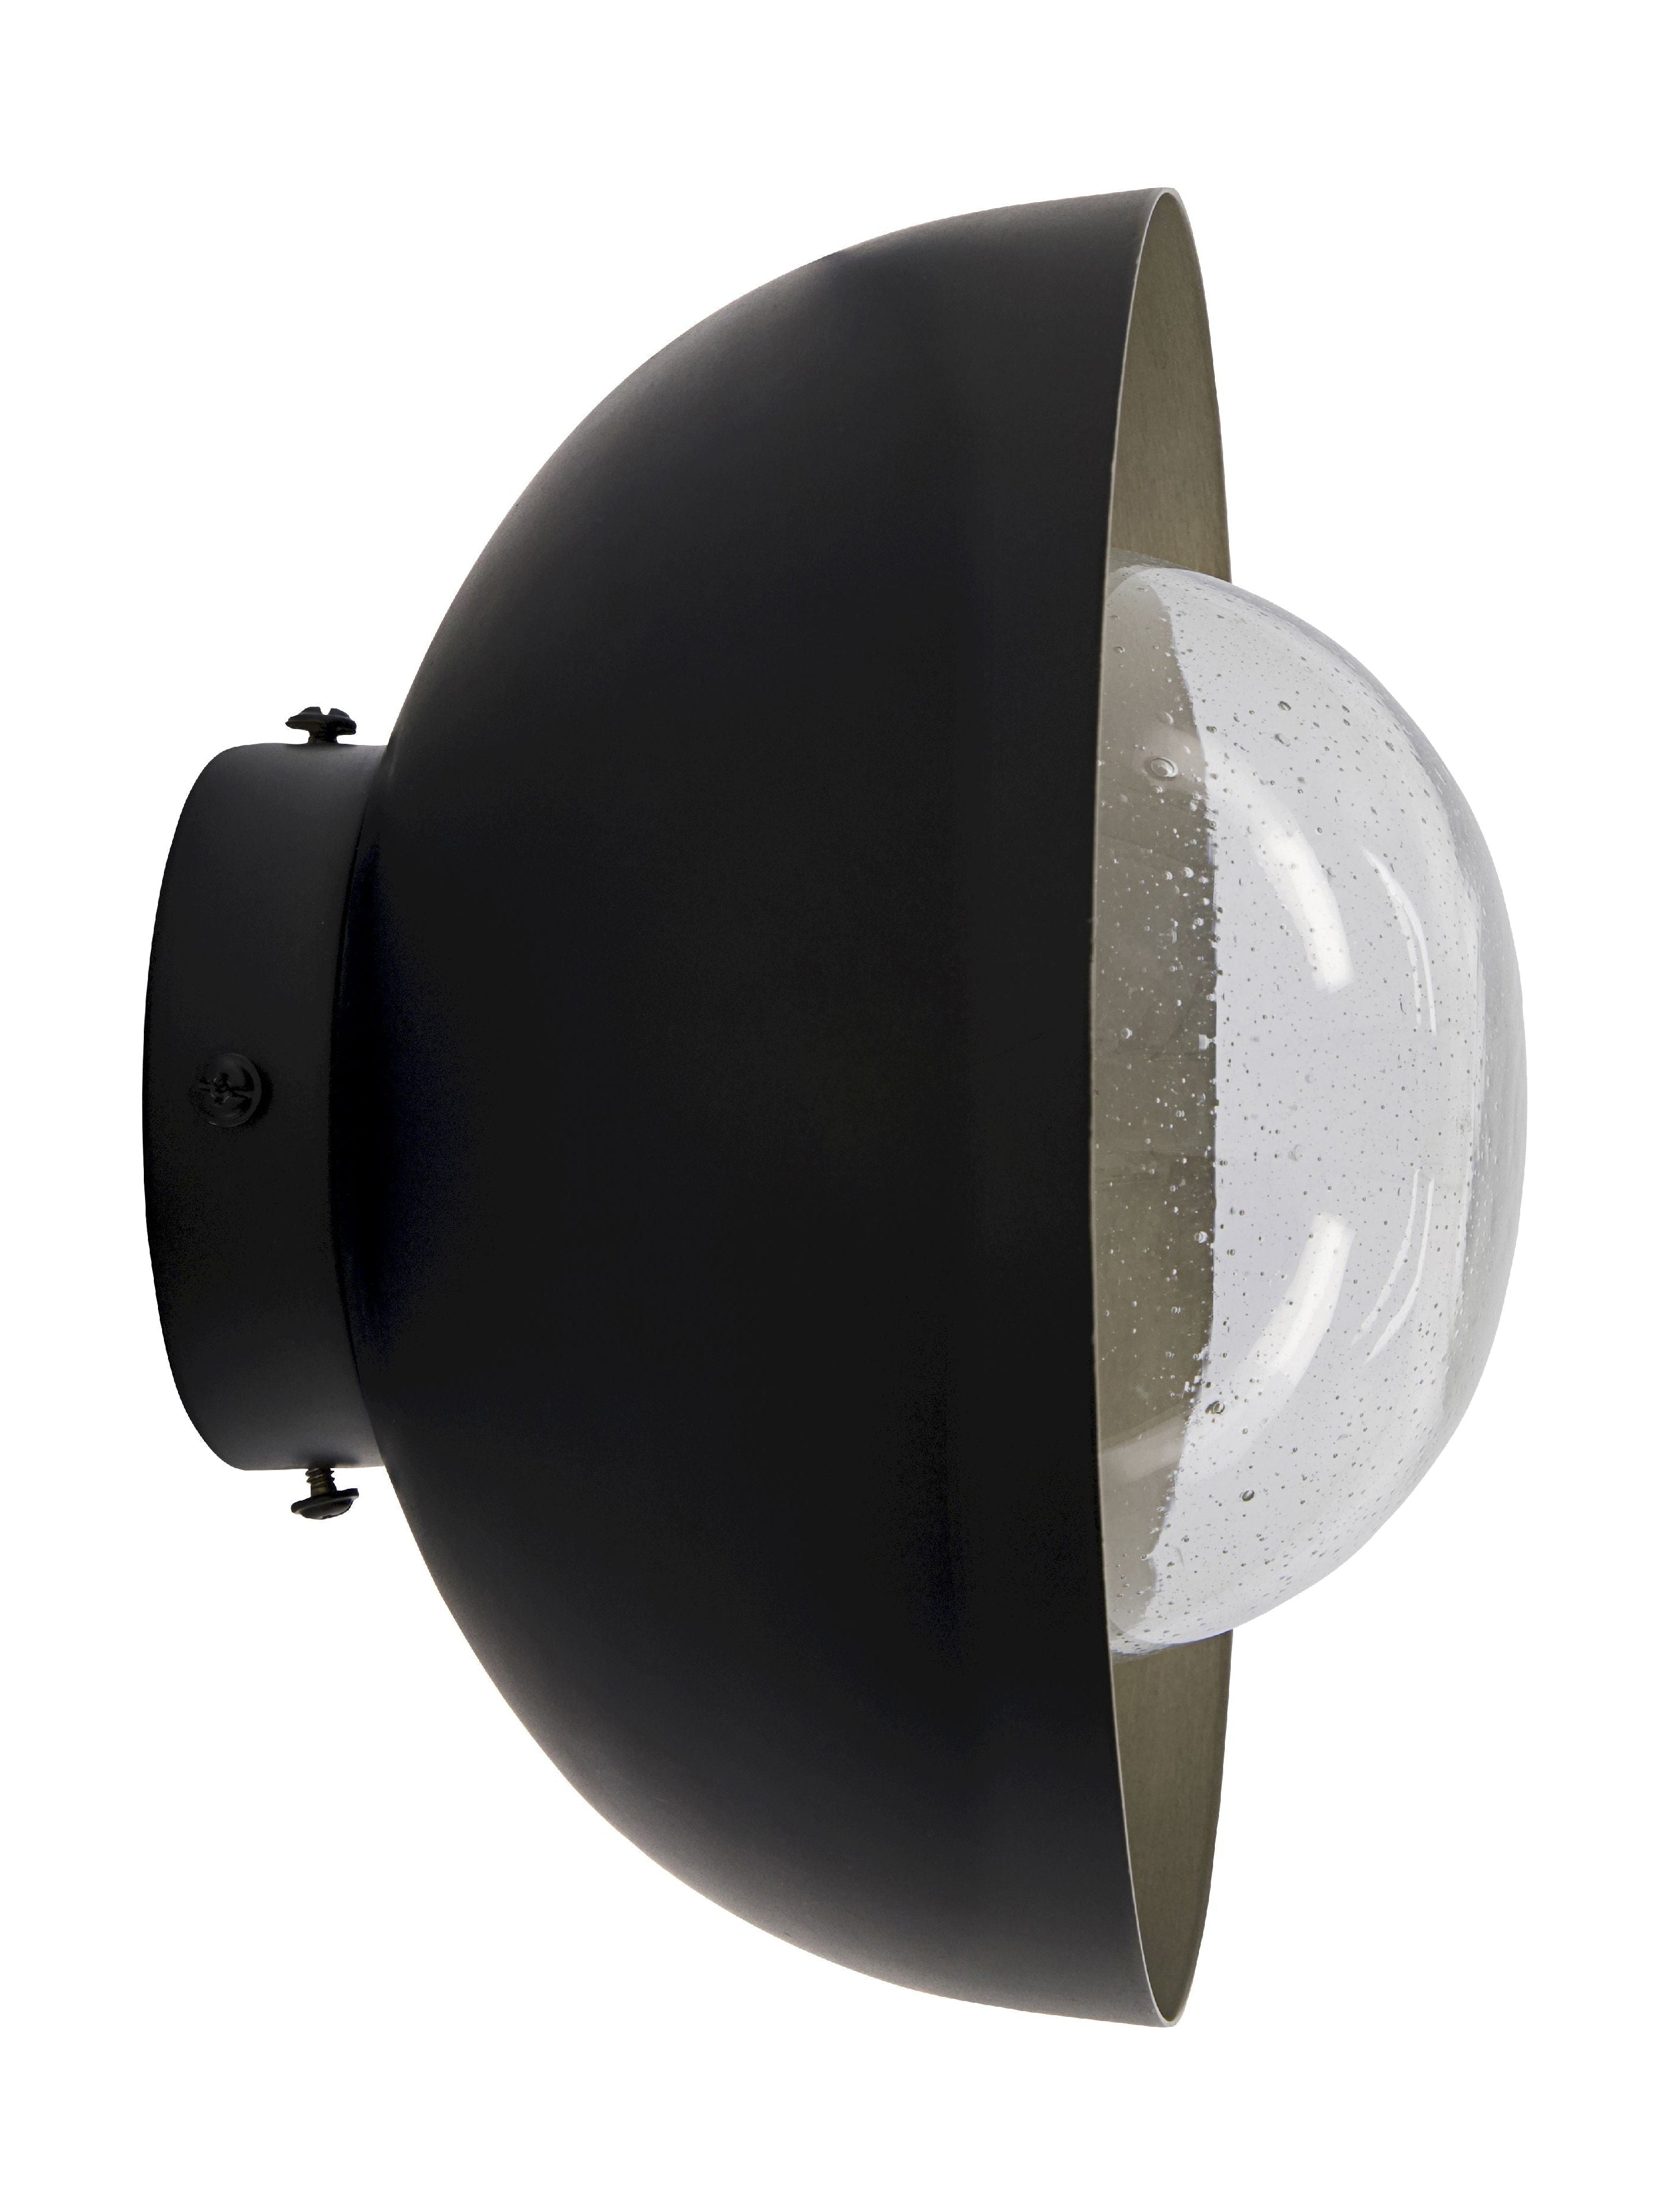 Af Nord Midtre Wall Lamp, kul